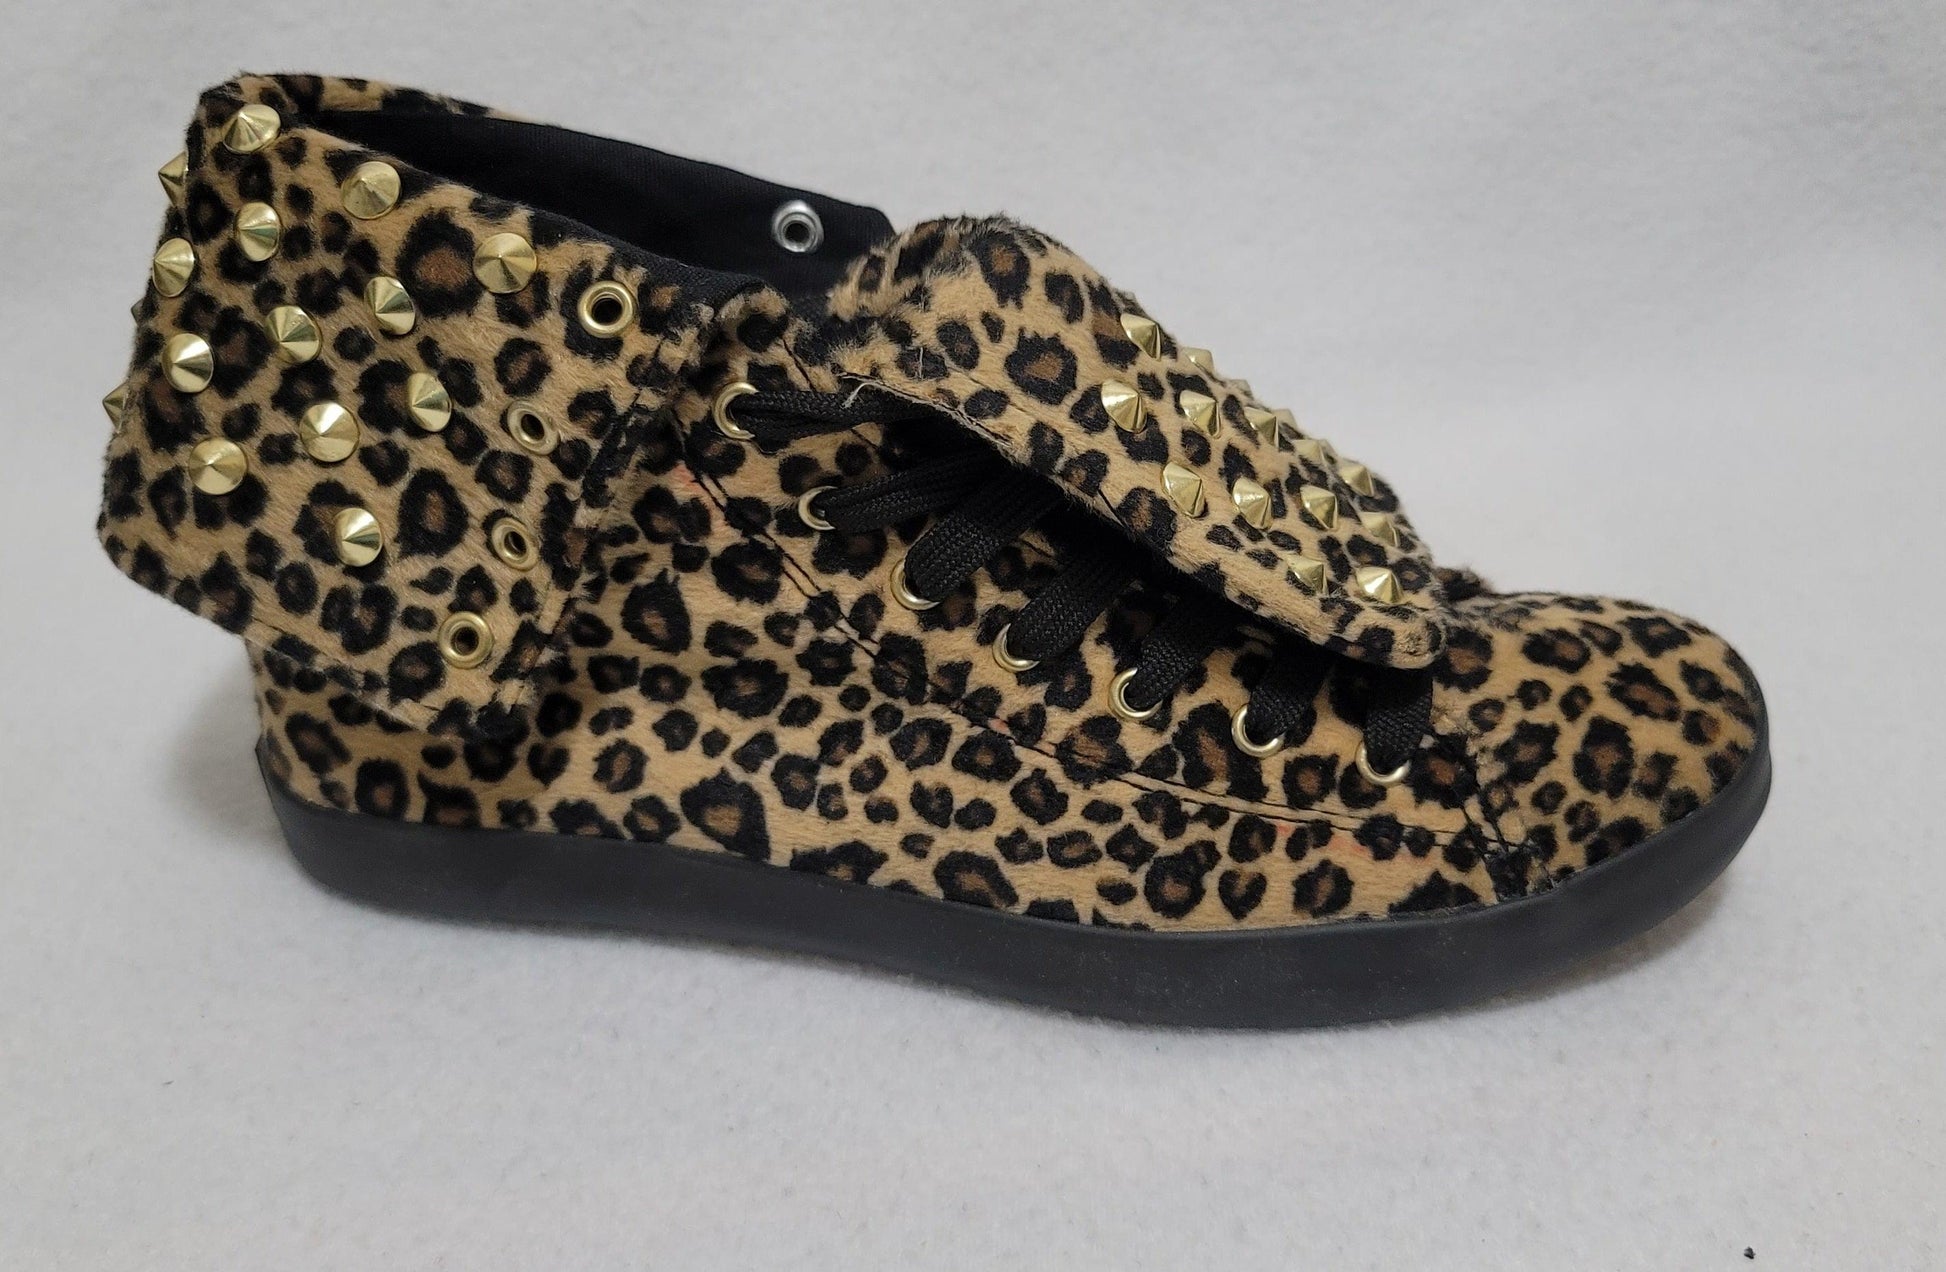 Cute To The Core Thrill Leopard Print Black High-Top Studded Sneakers Size US 7.5 - SVNYFancy